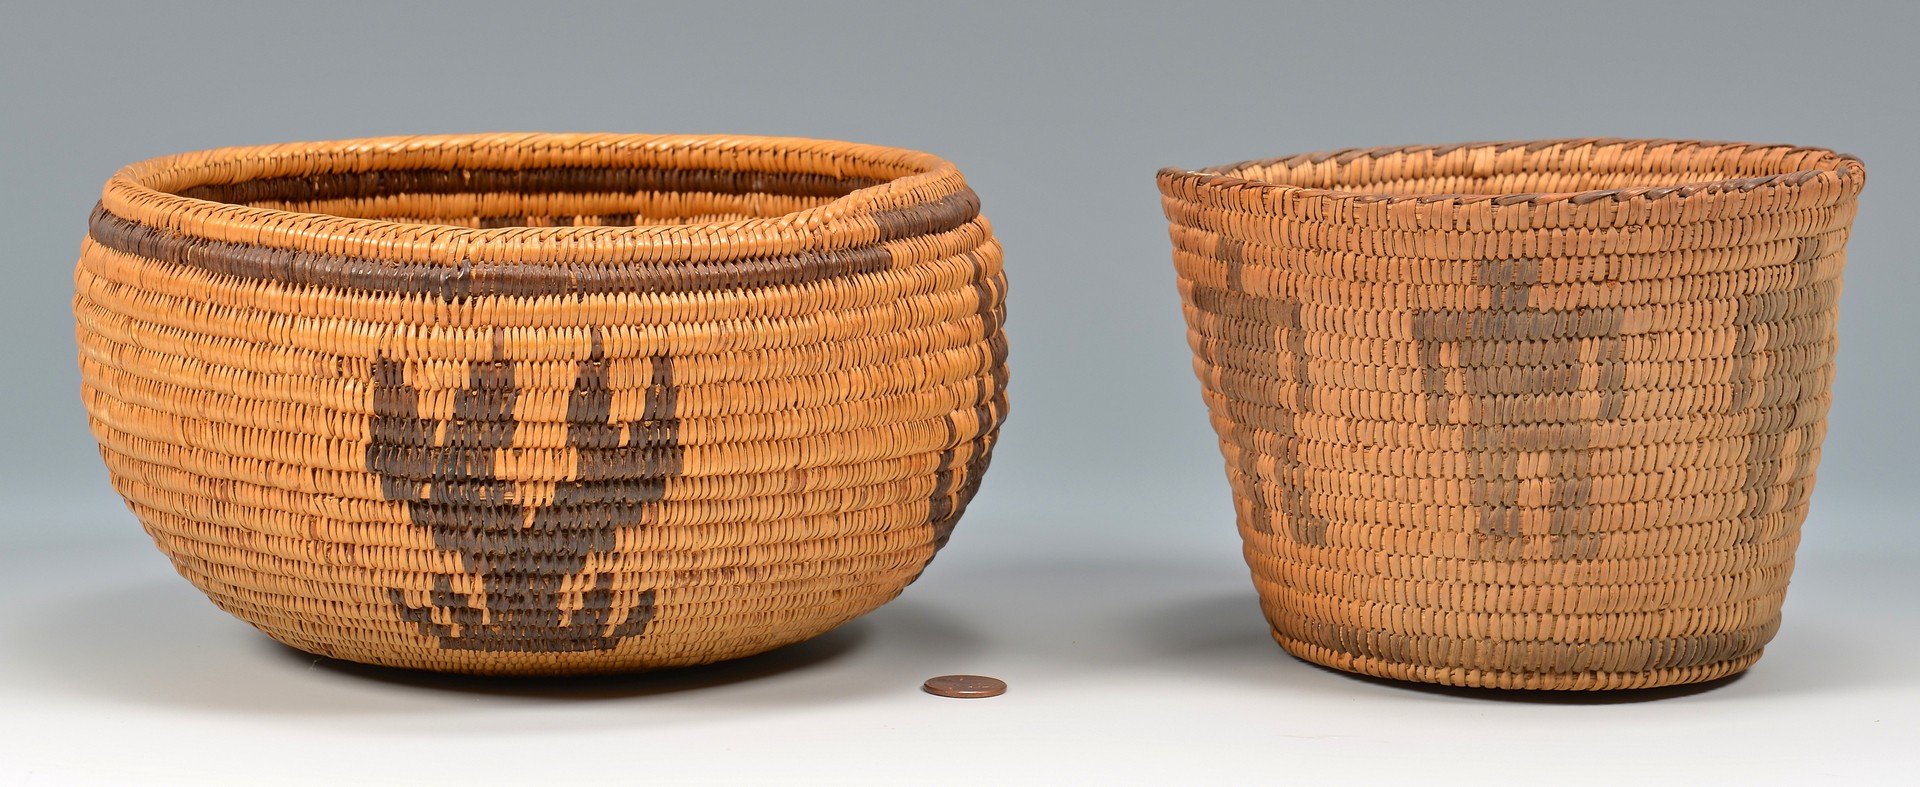 Lot 522: 2 Southwest Native American Coiled Baskets